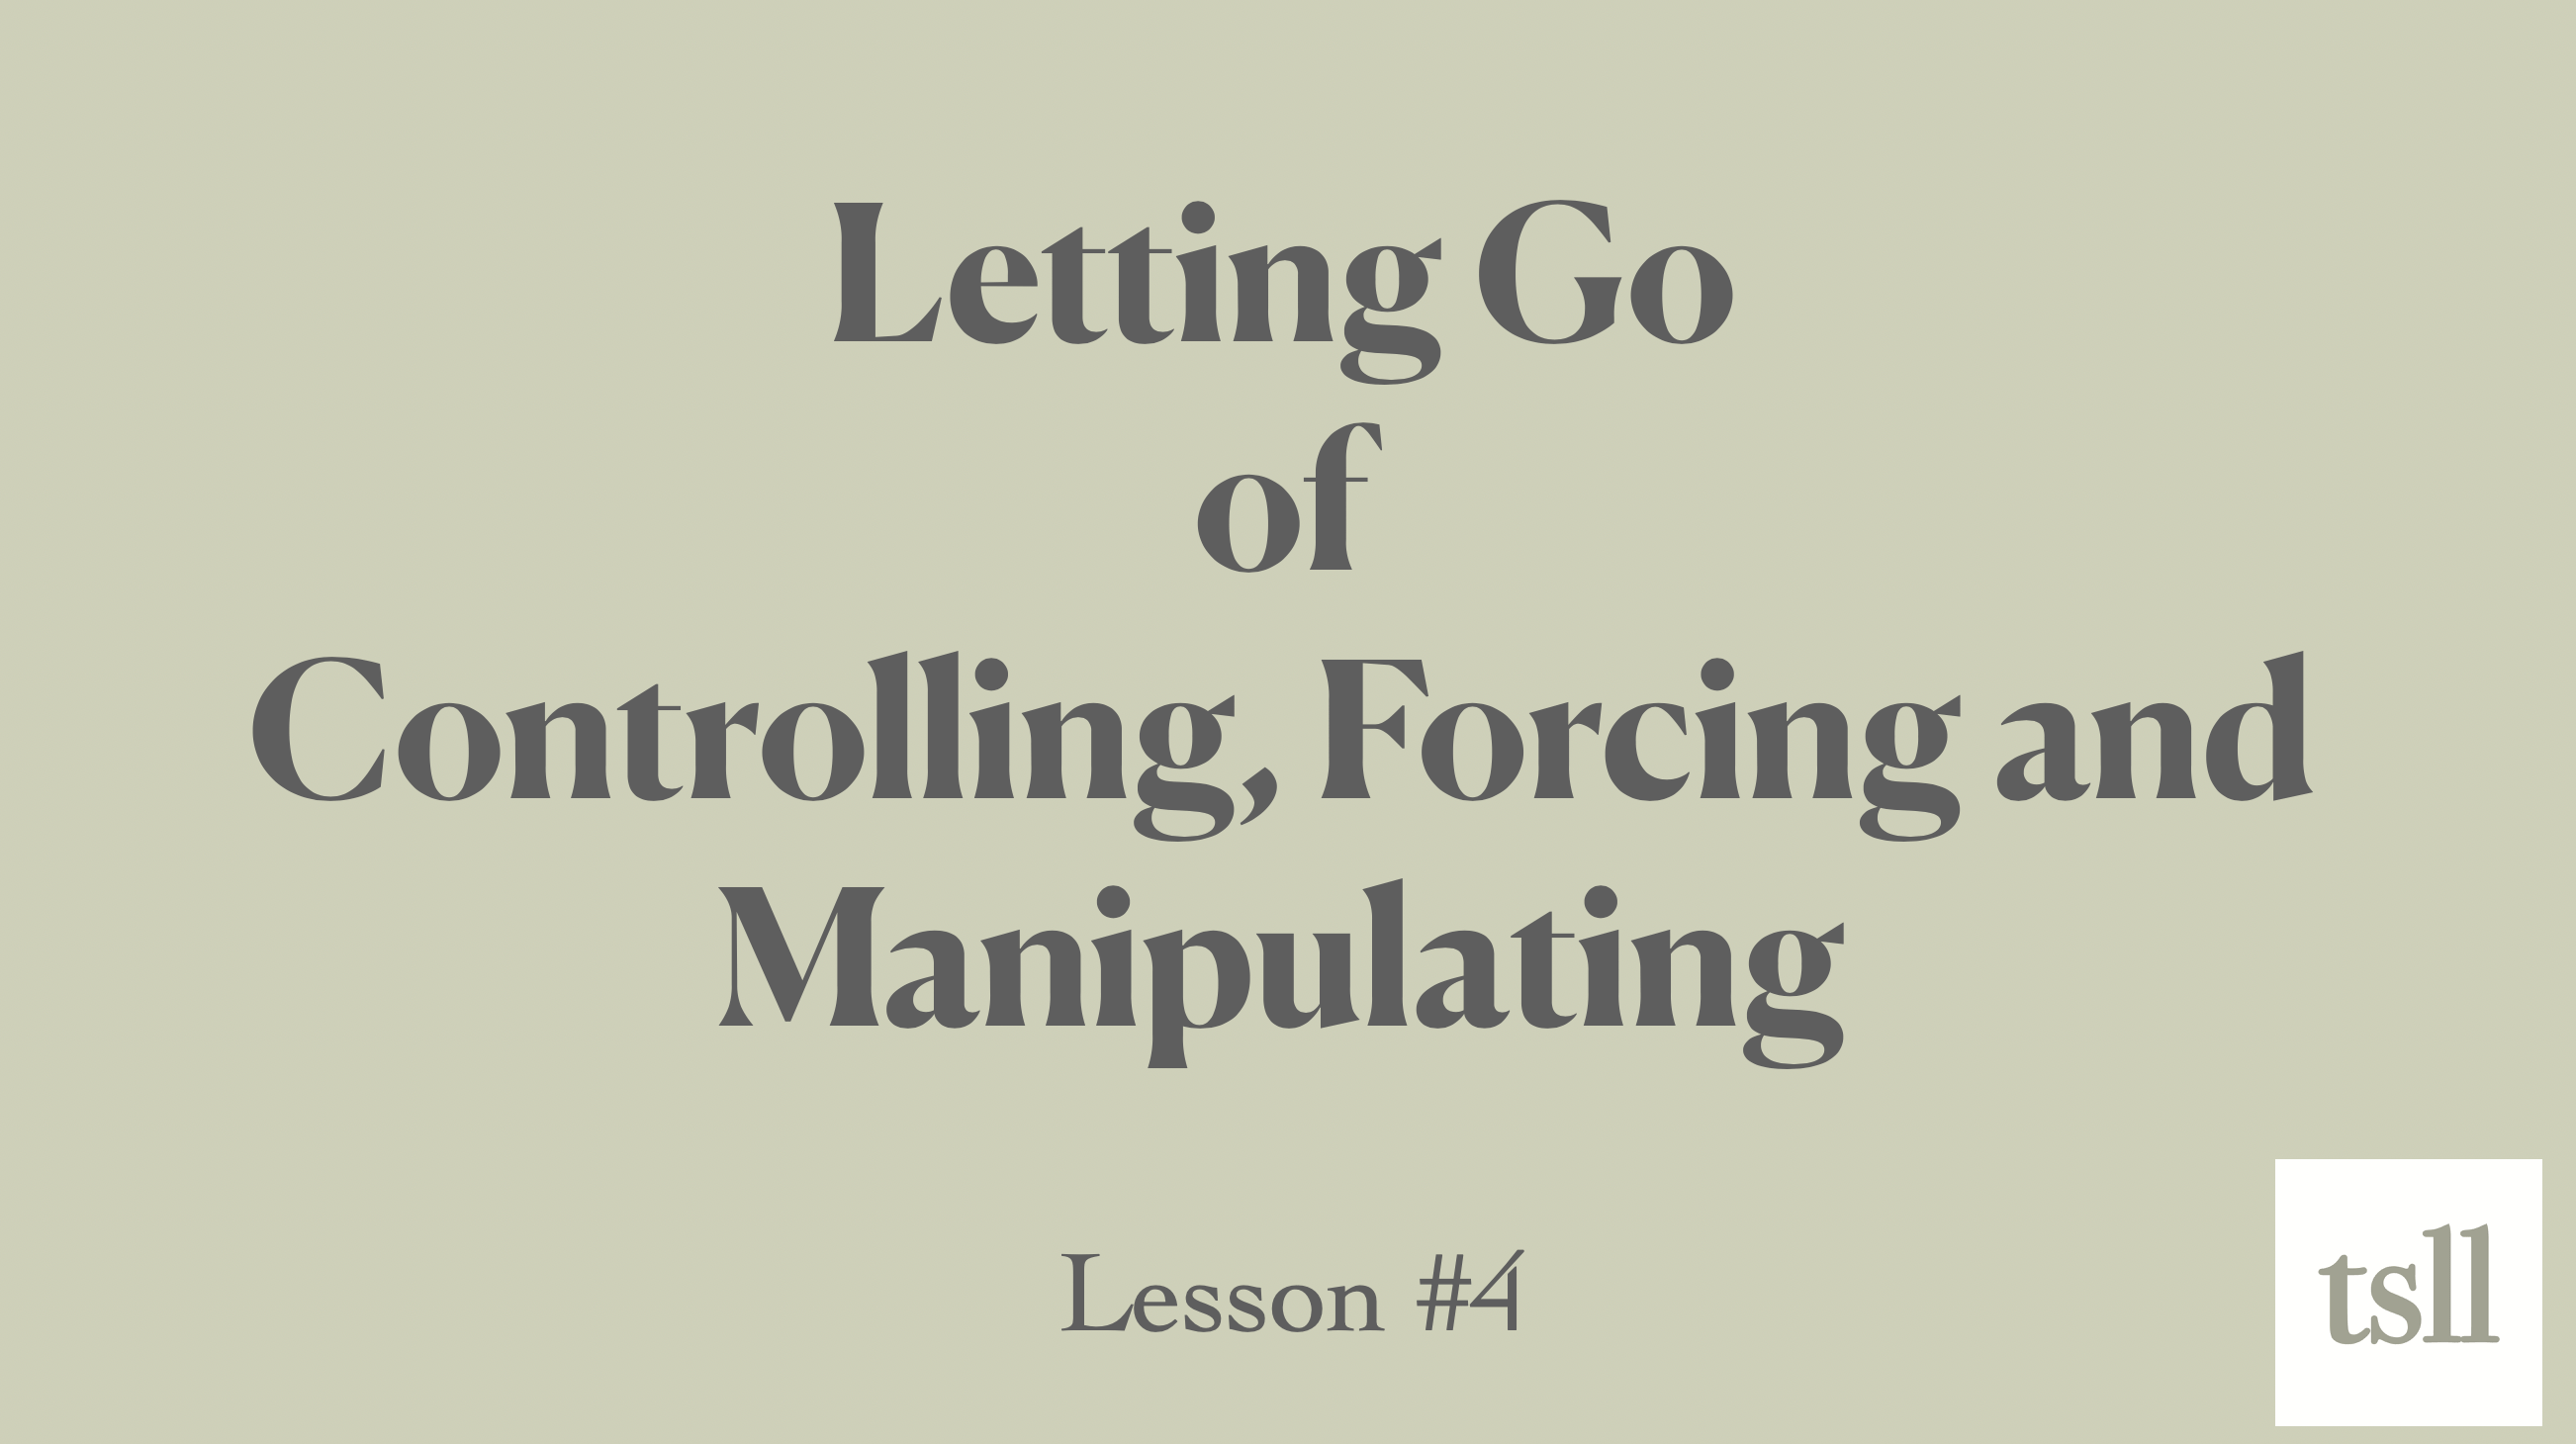 Part 5: Letting go of Controlling, Forcing and Manipulating